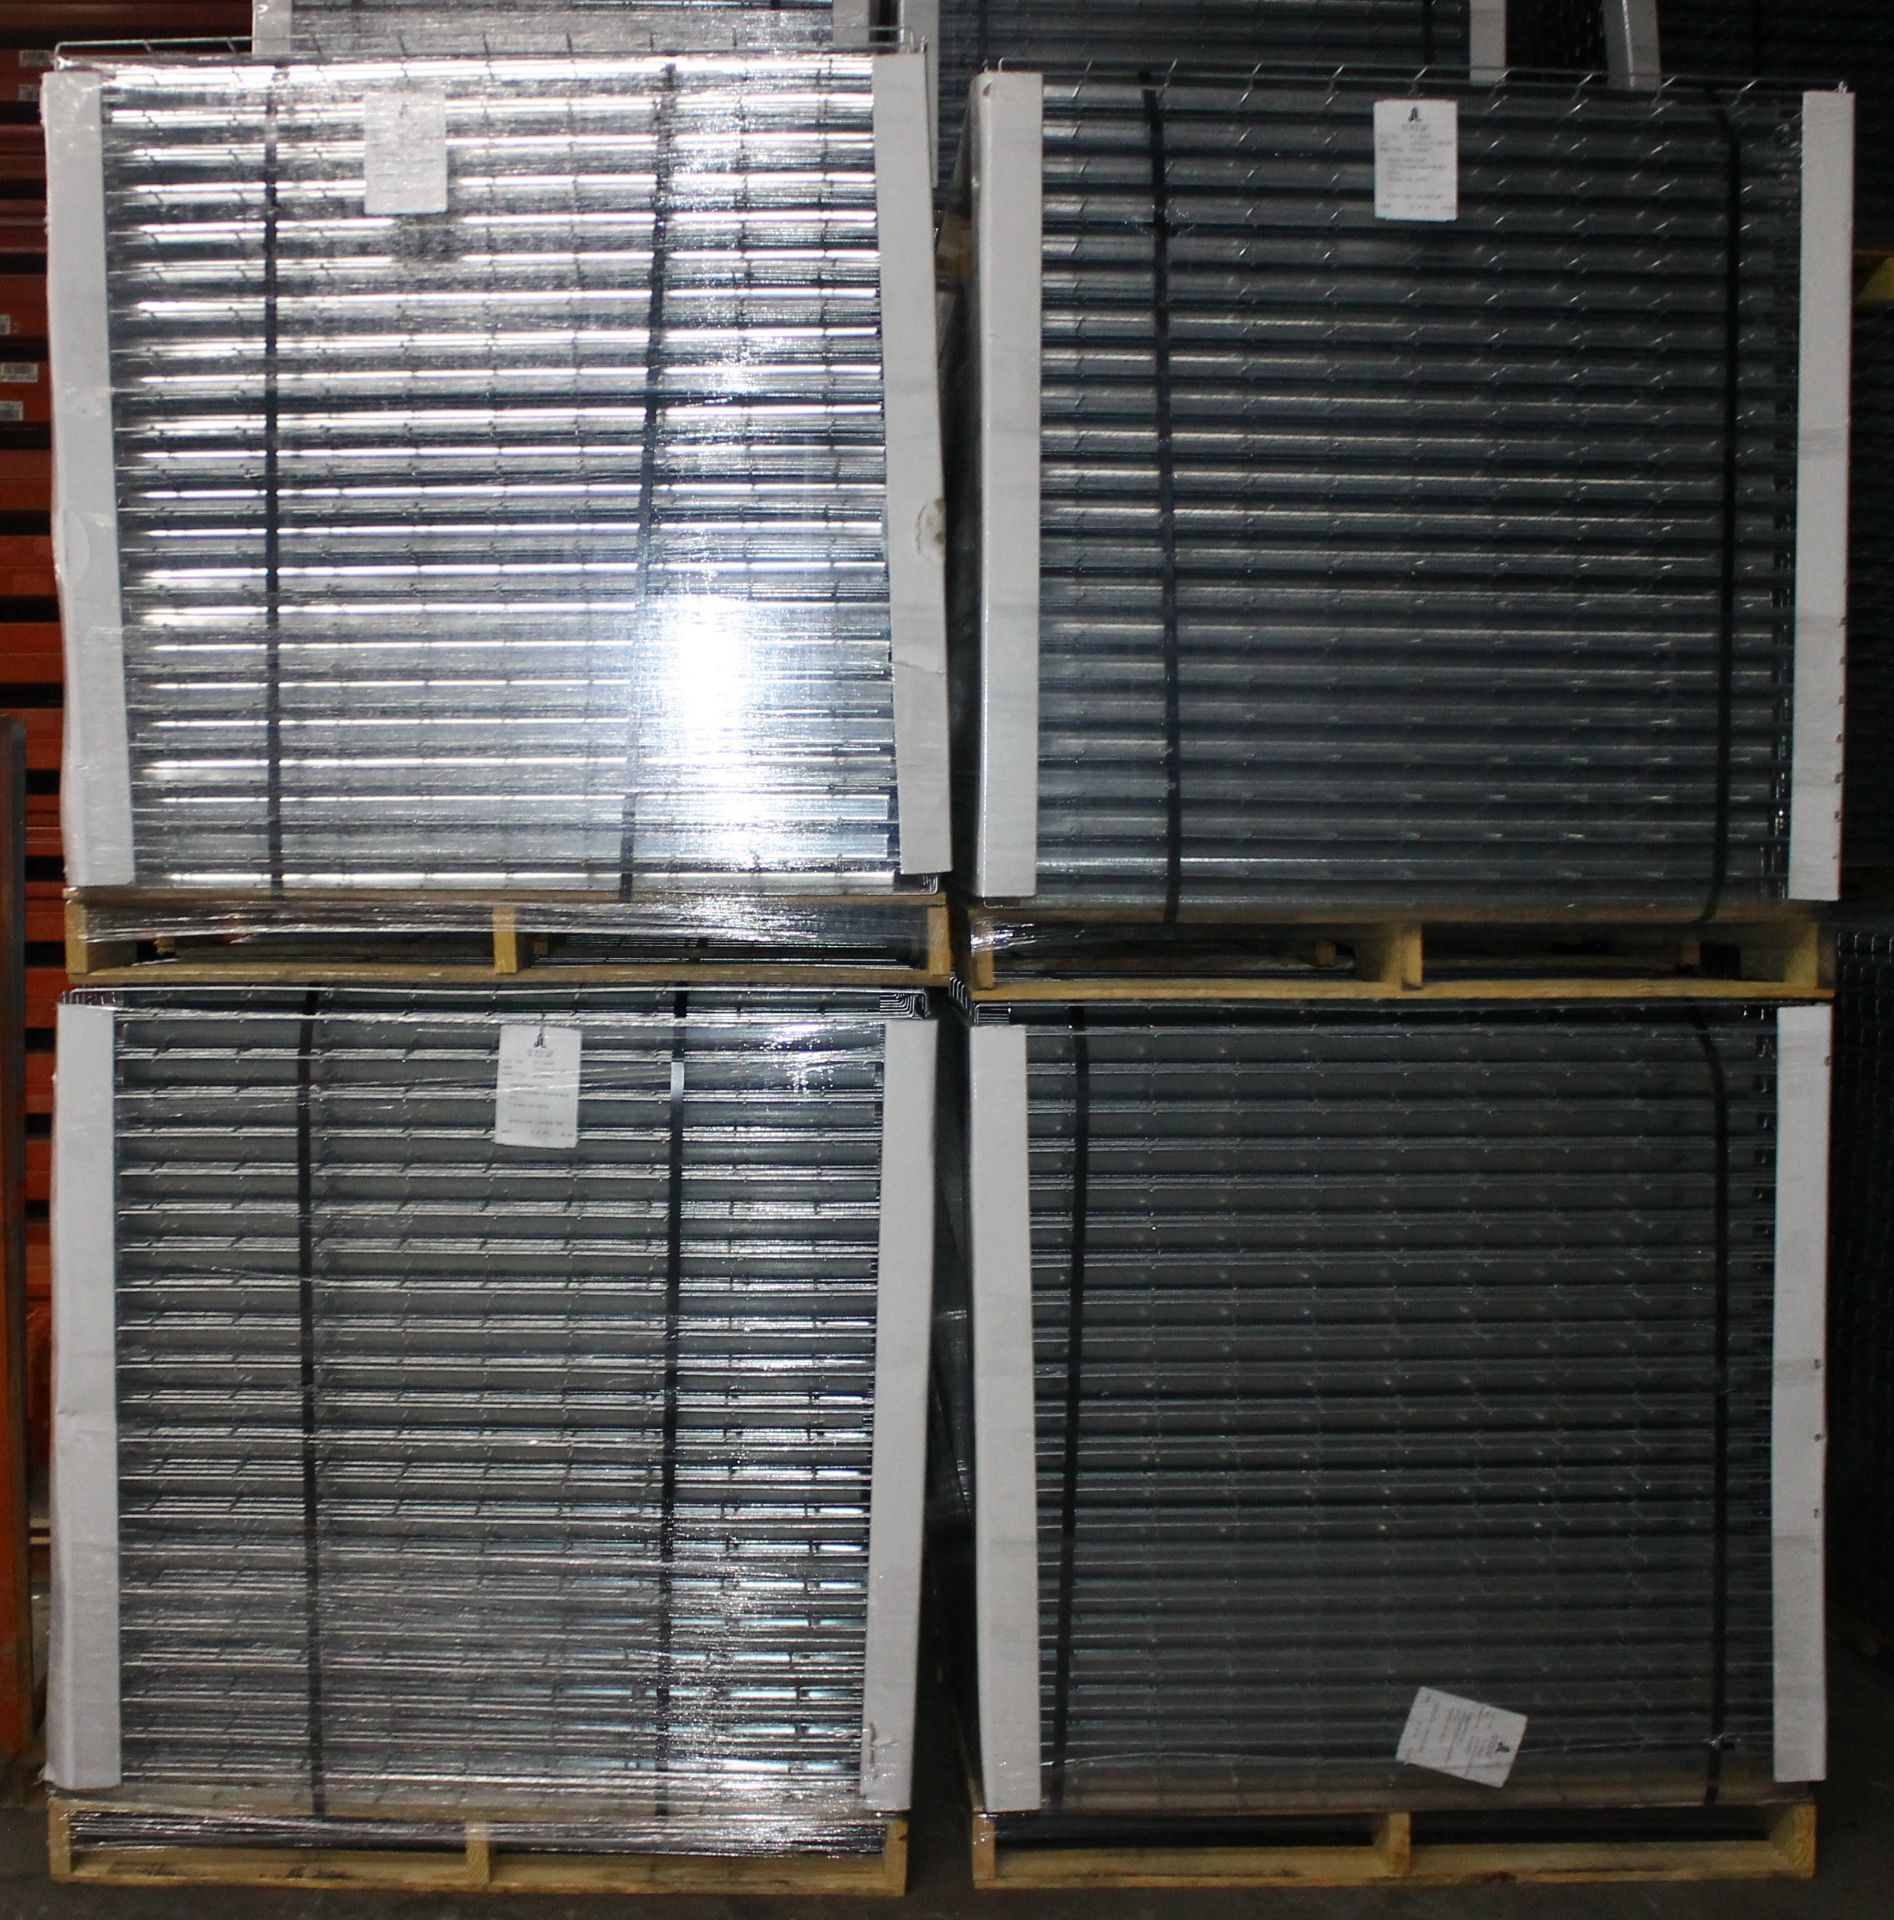 NEW 120 PCS OF STANDARD 42" X 52" WIREDECK - 2250 LBS CAPACITY